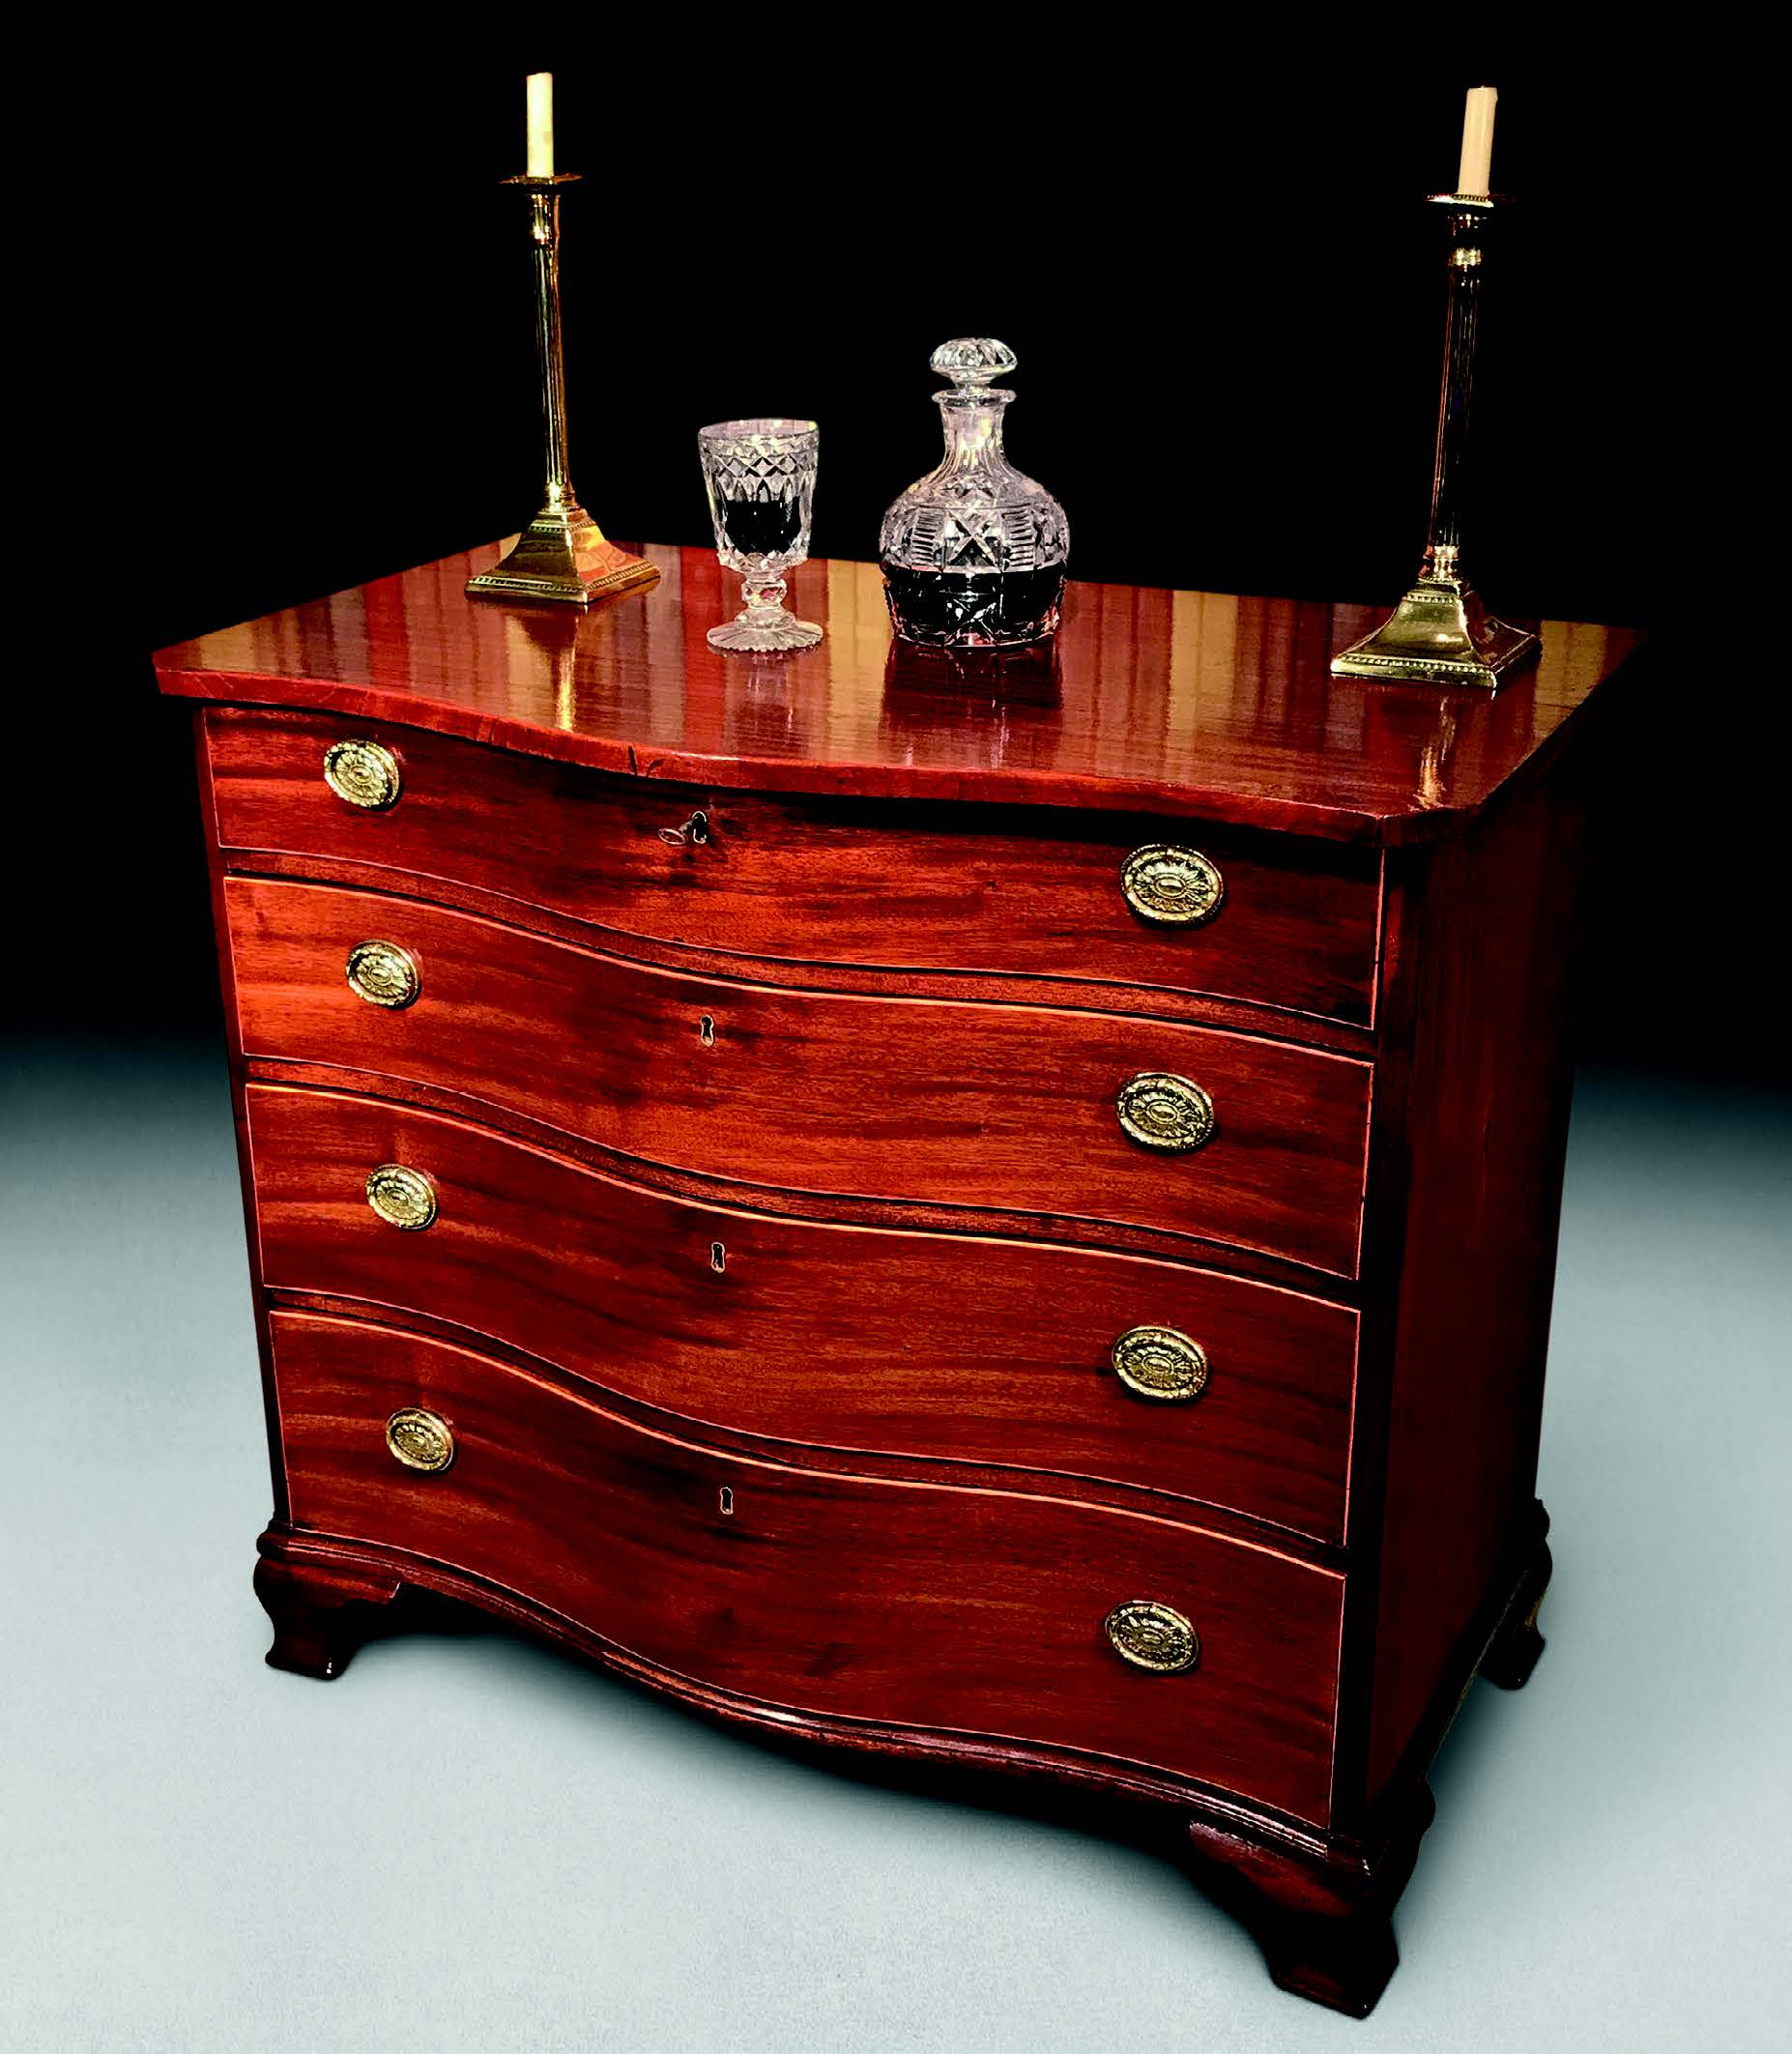 A George III mahogany serpentine chest of drawers, c.1780, with original oval plate handles